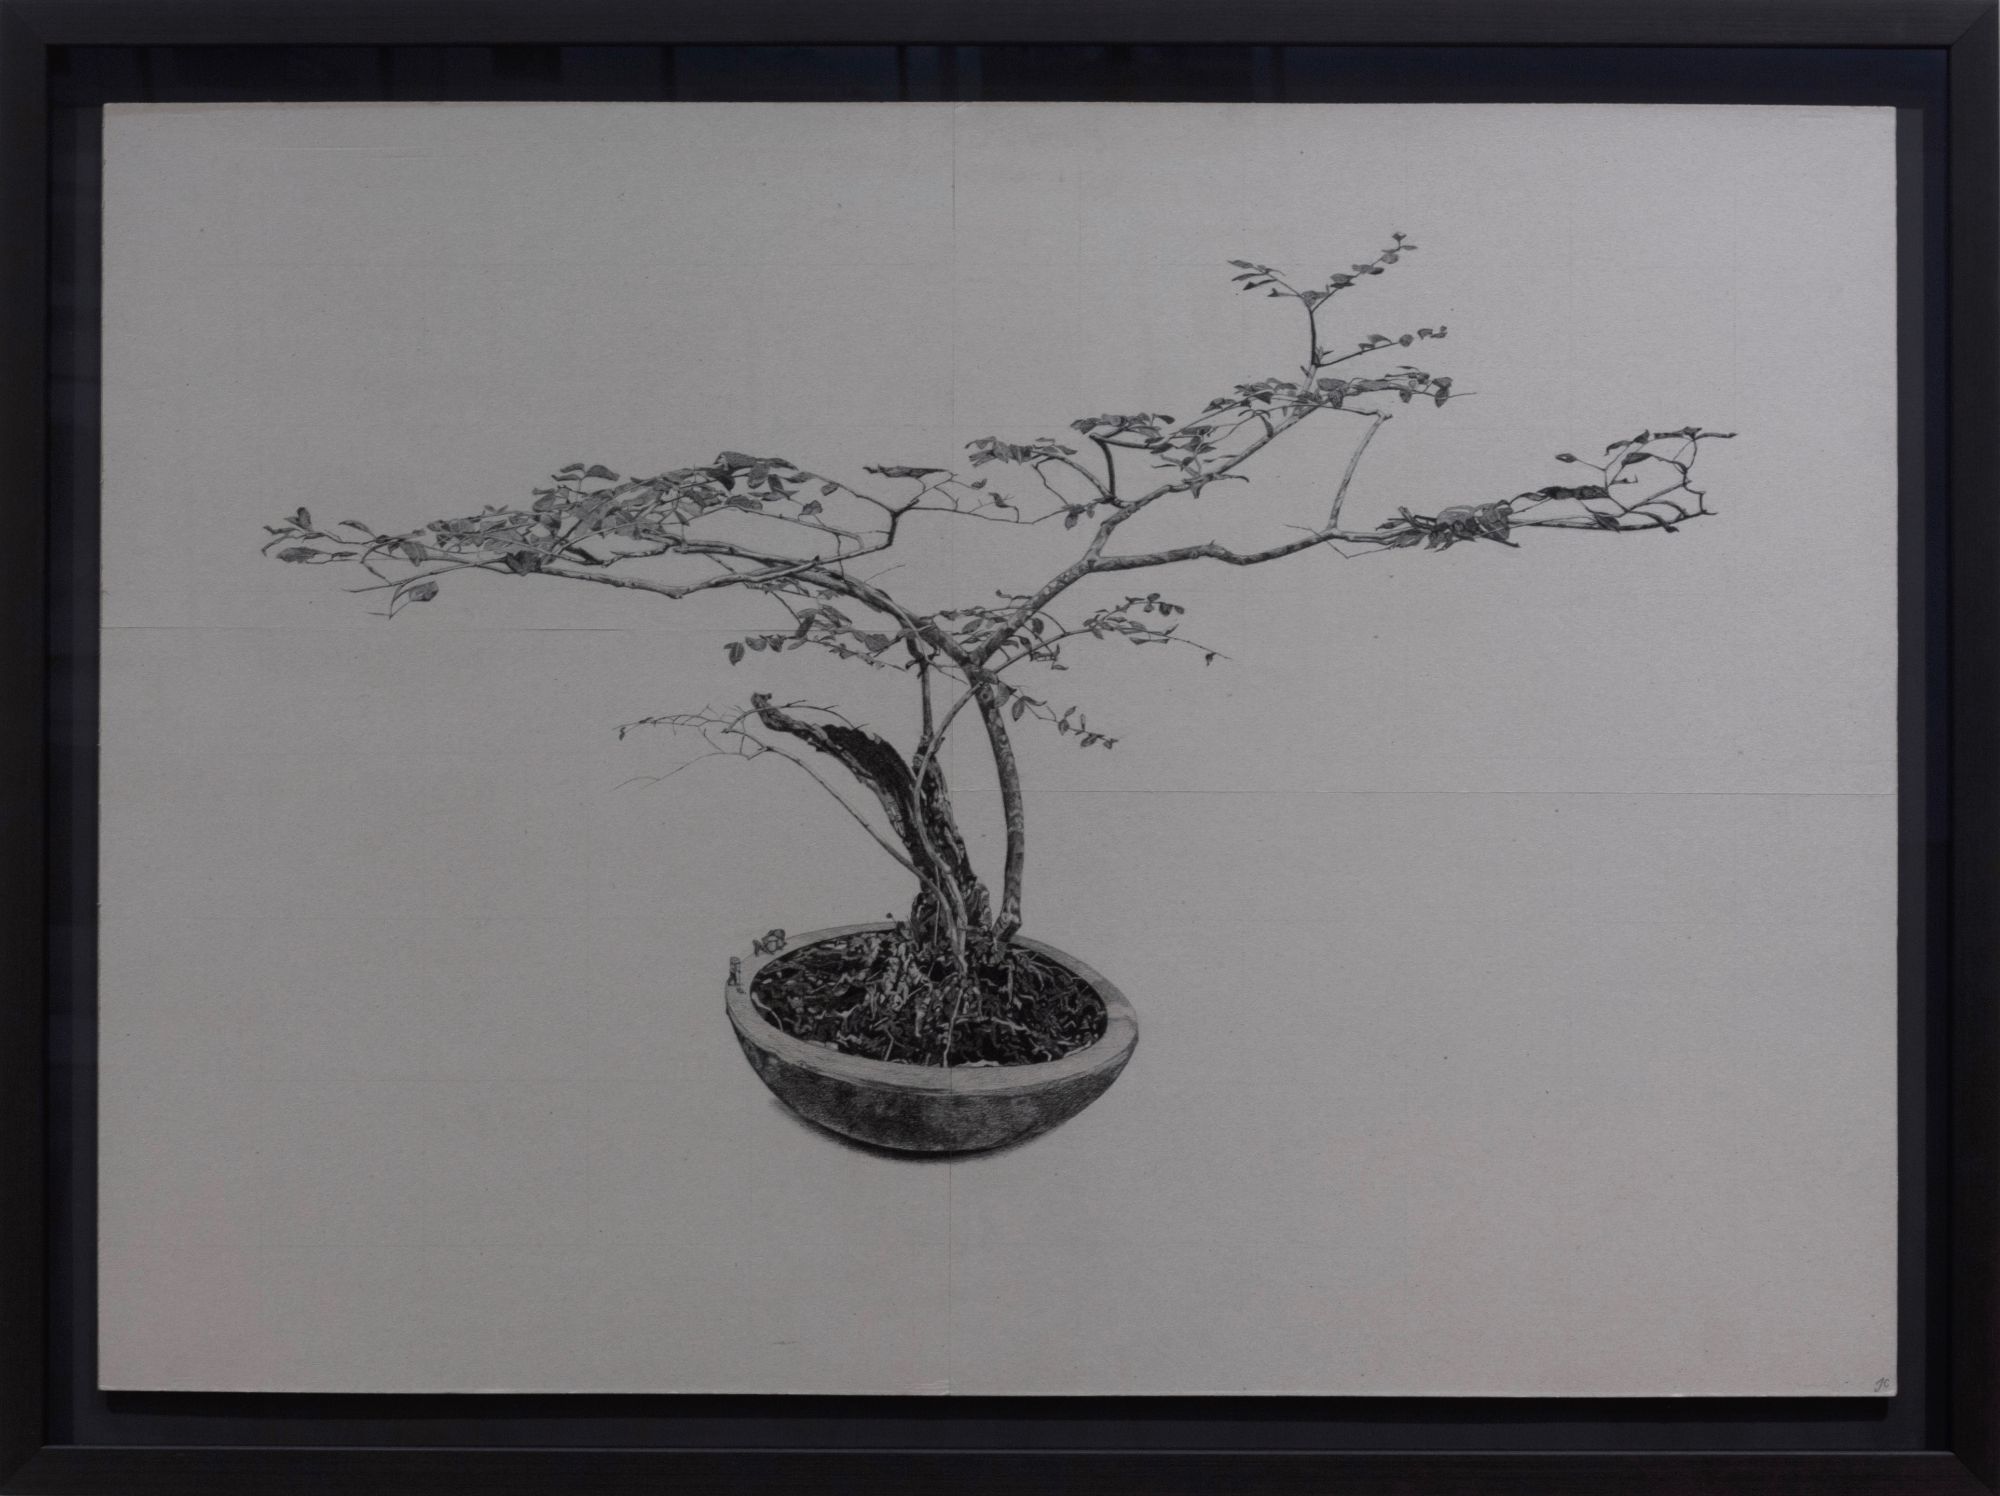 Large drawing of bonsai tree in charcoal